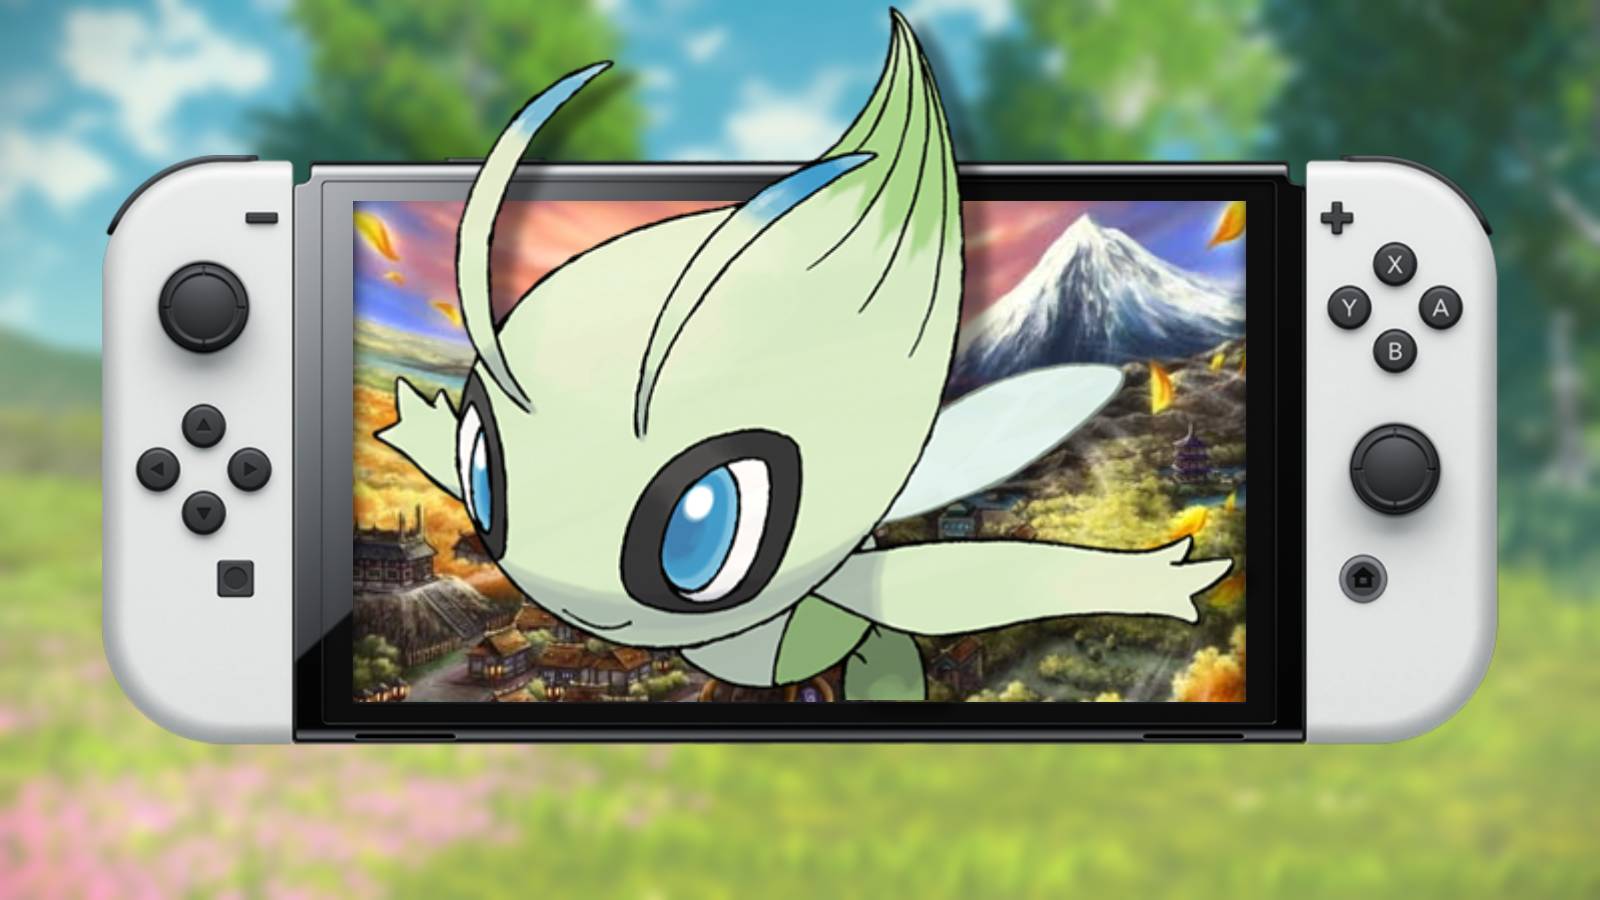 A mock-up imagines Pokemon Legends Celebi, with the mythical Pokemon Celebi appearing to reach out of a Nintendo Switch OLED Model